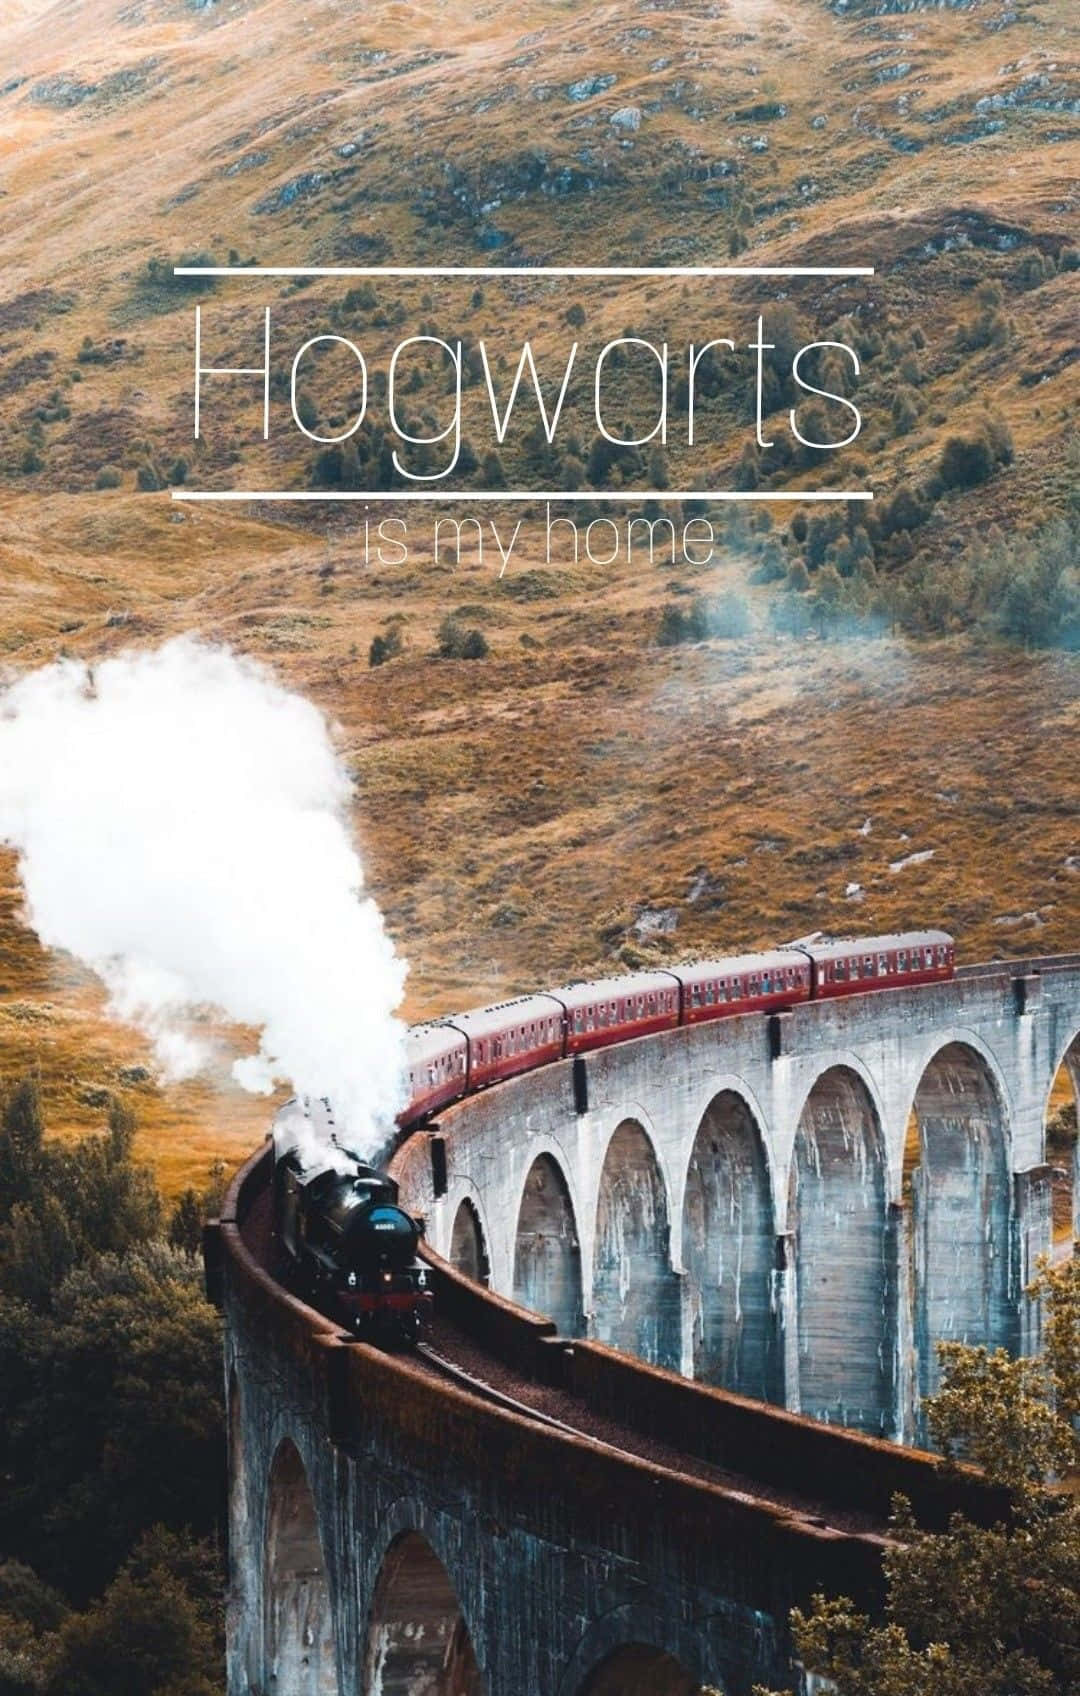 The Hogwarts Express Train Brings Magic and Adventure to the Imaginative Wallpaper